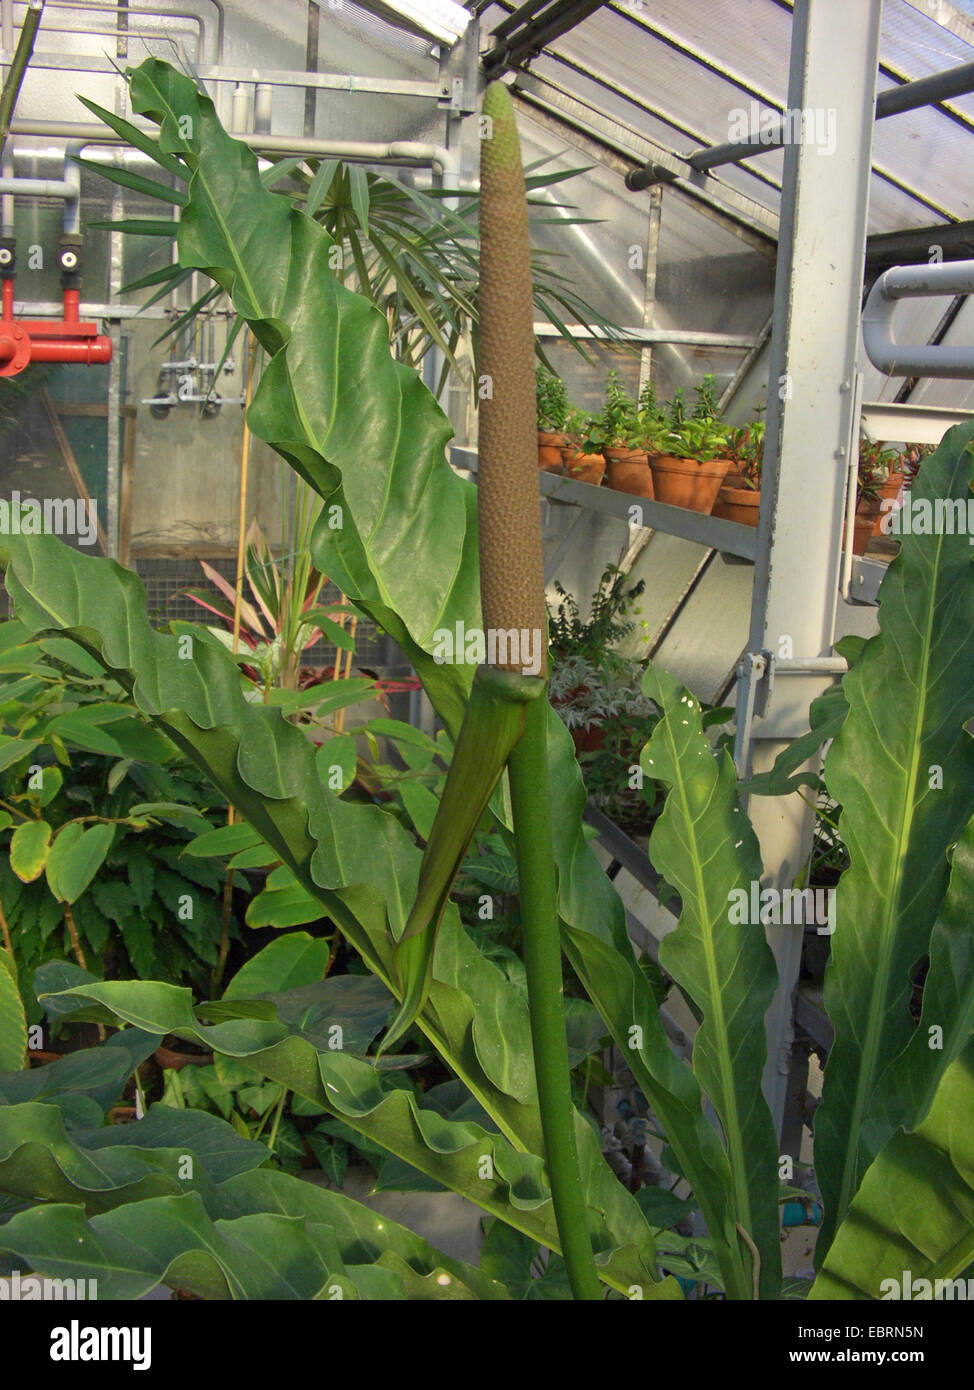 Anthurium schlechtendalii (Anthurium schlechtendalii), blooming in a green house Stock Photo